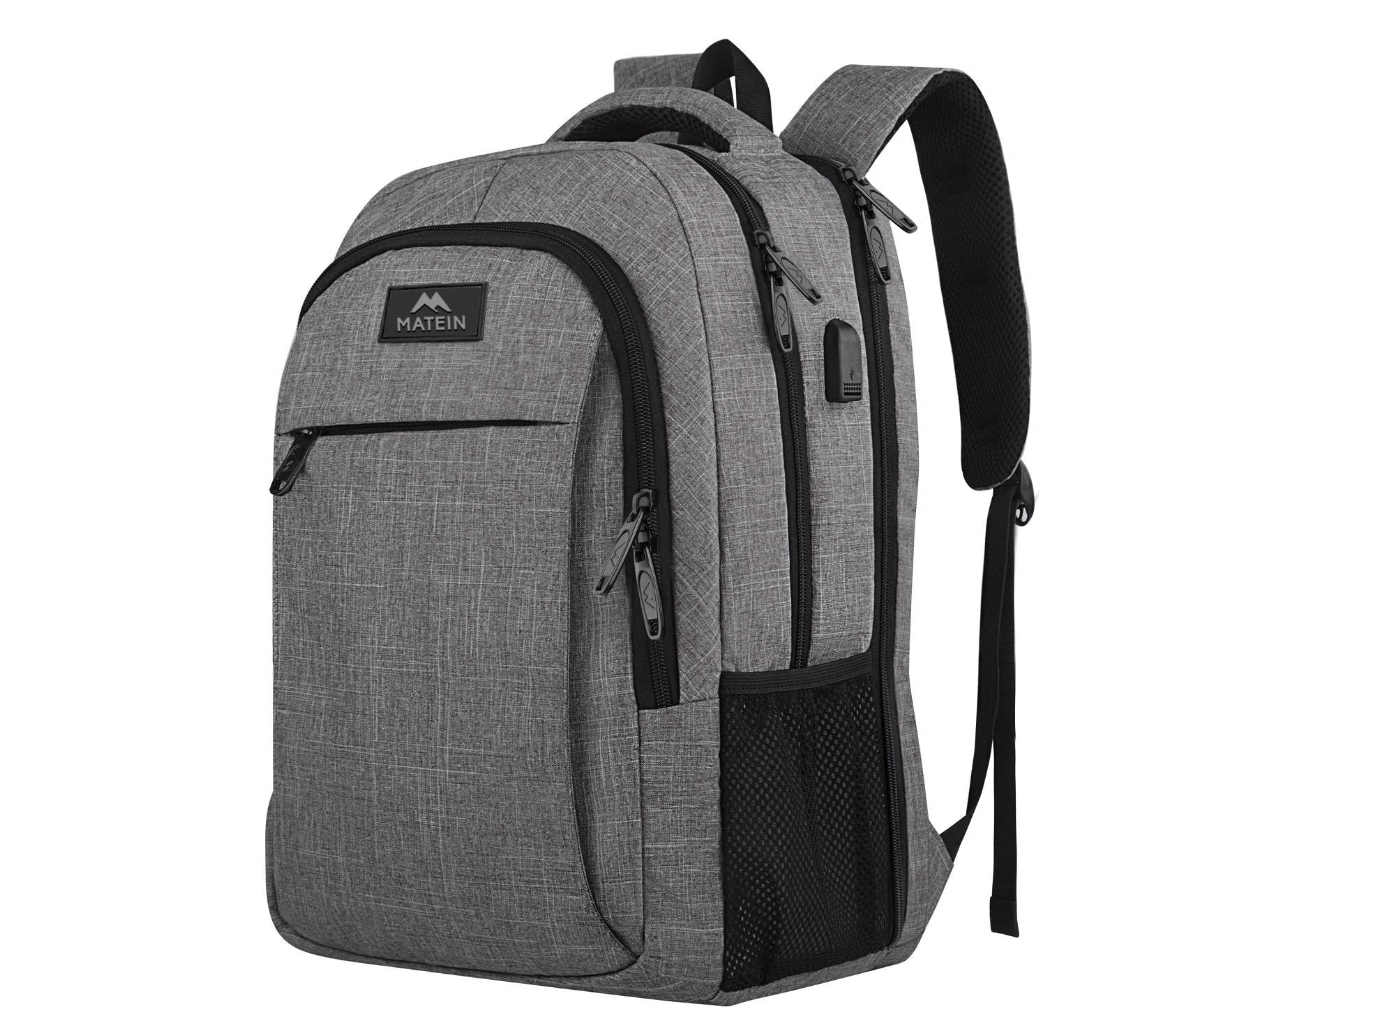 Example Insightful doorway The 10 Best College Backpacks for 2022